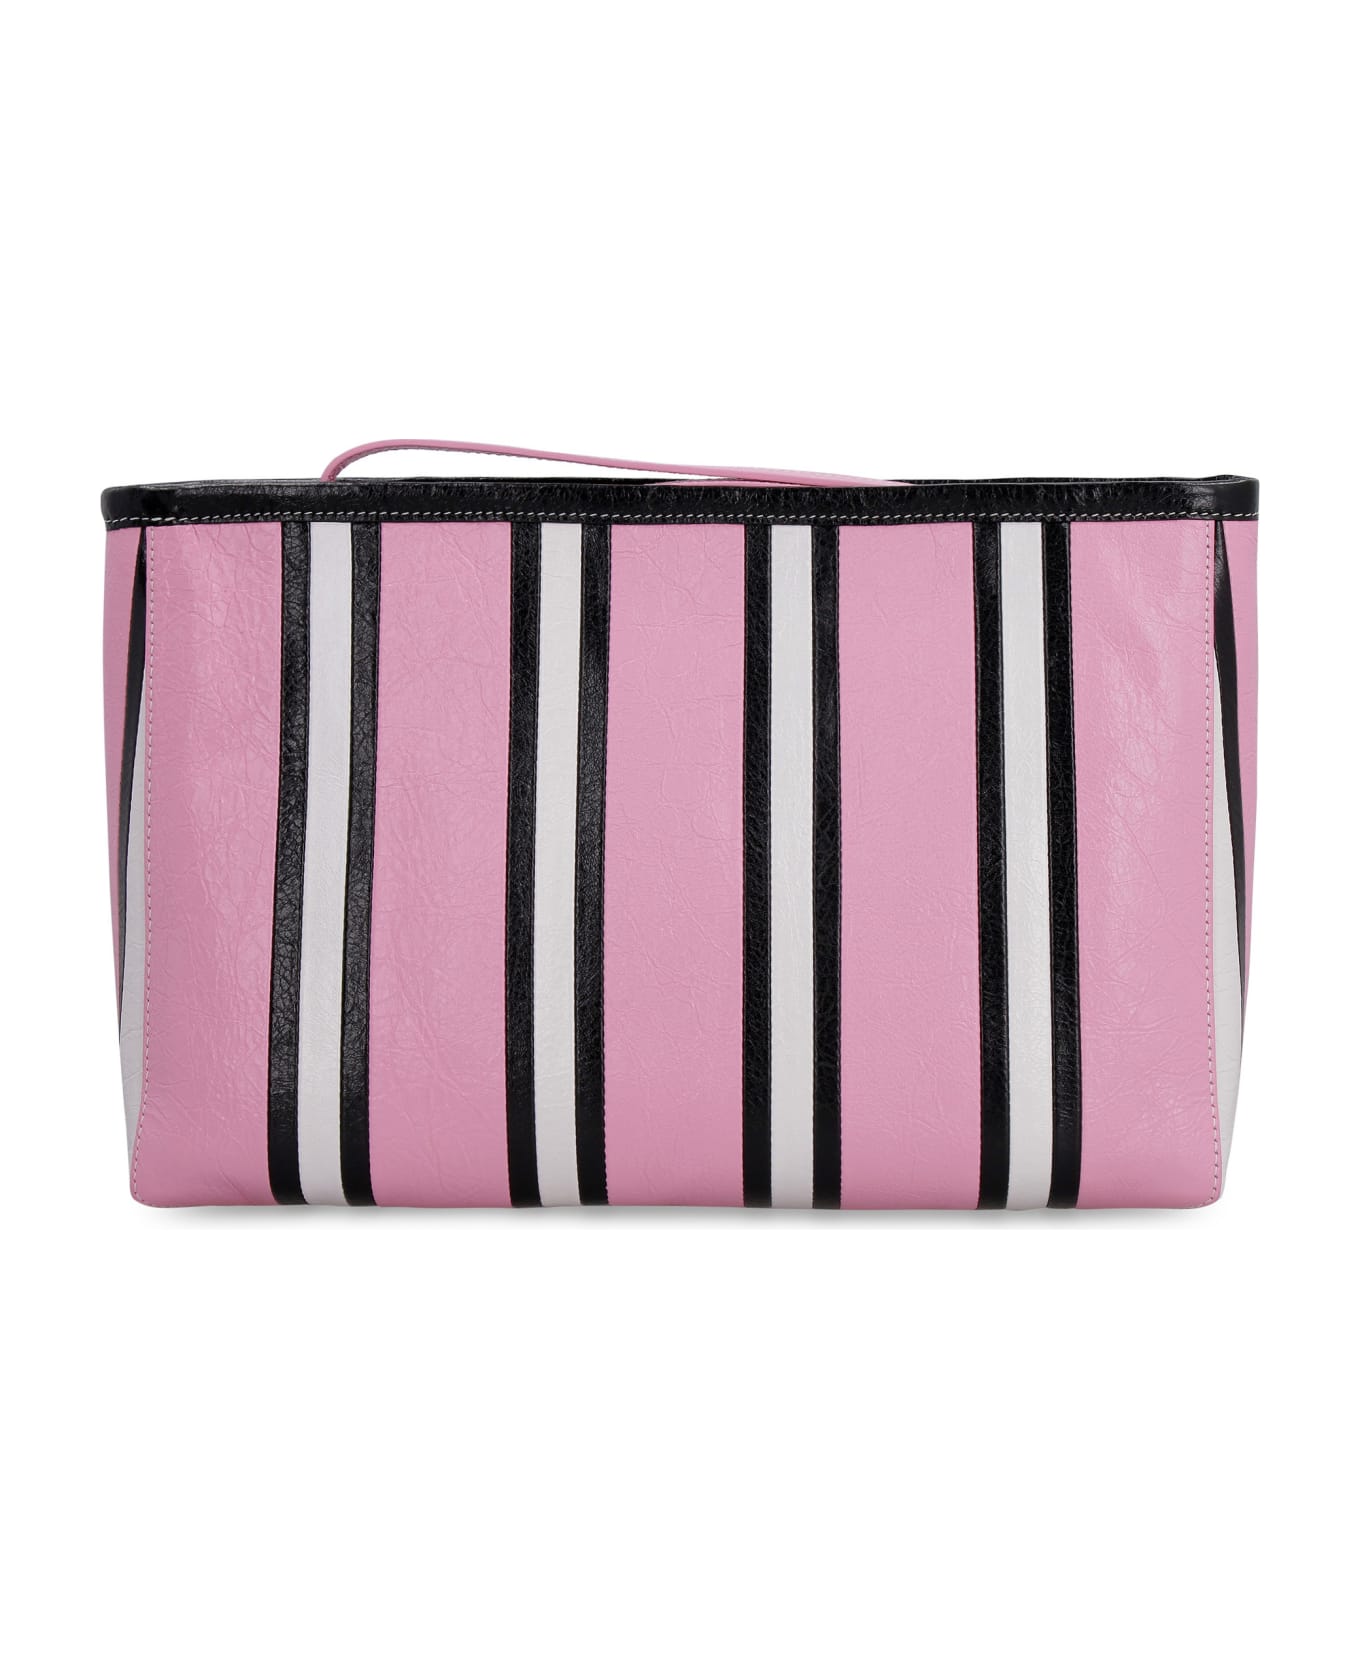 Balenciaga Barbes Leather Clutch - Pink クラッチバッグ